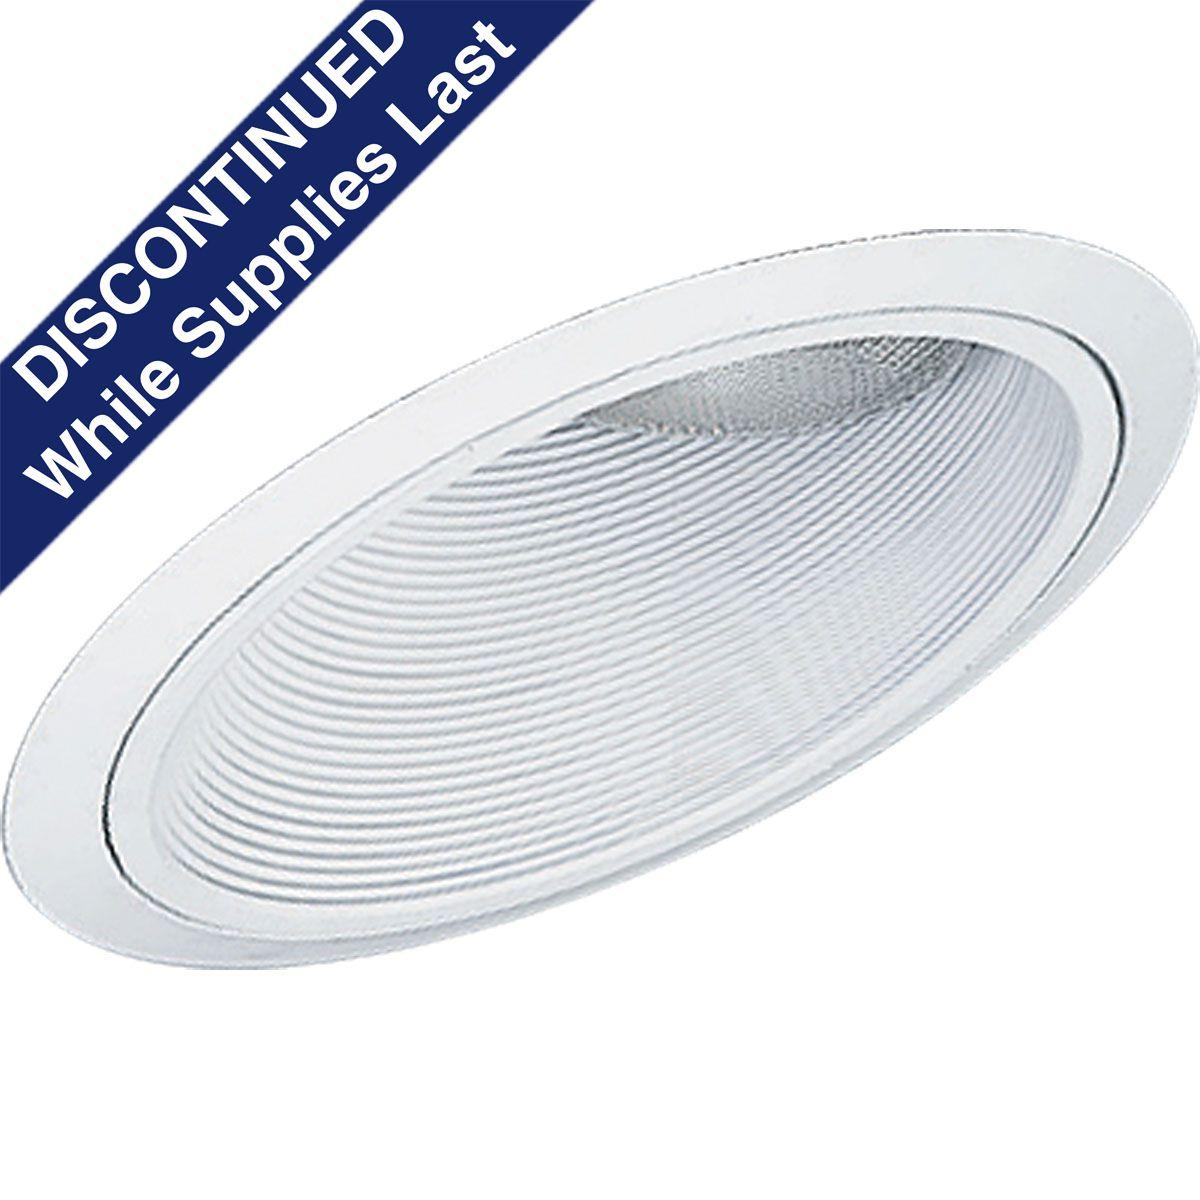 Hubbell P8000-28 Sloped Ceiling step baffle for 8" housing . For insulated ceilings. 9-3/4" outside diameter. White finish.  ; White finish. ; Bright white powder painted steel flange and ball. ; No light leaks around trim flange.